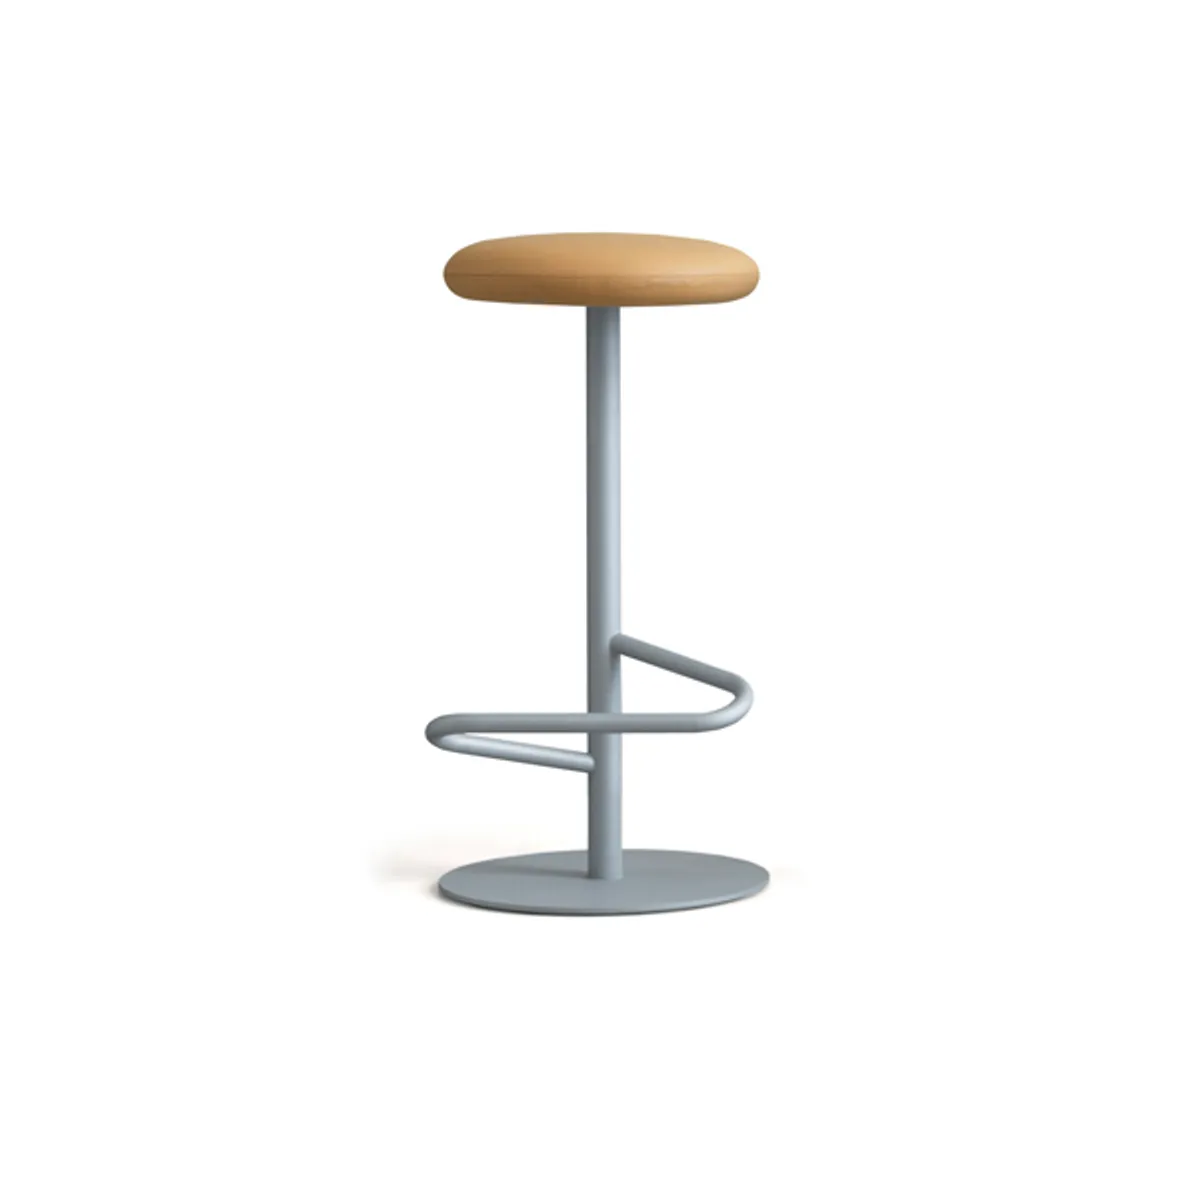 Odette Bar Stool 0920 Inside Out Contracts